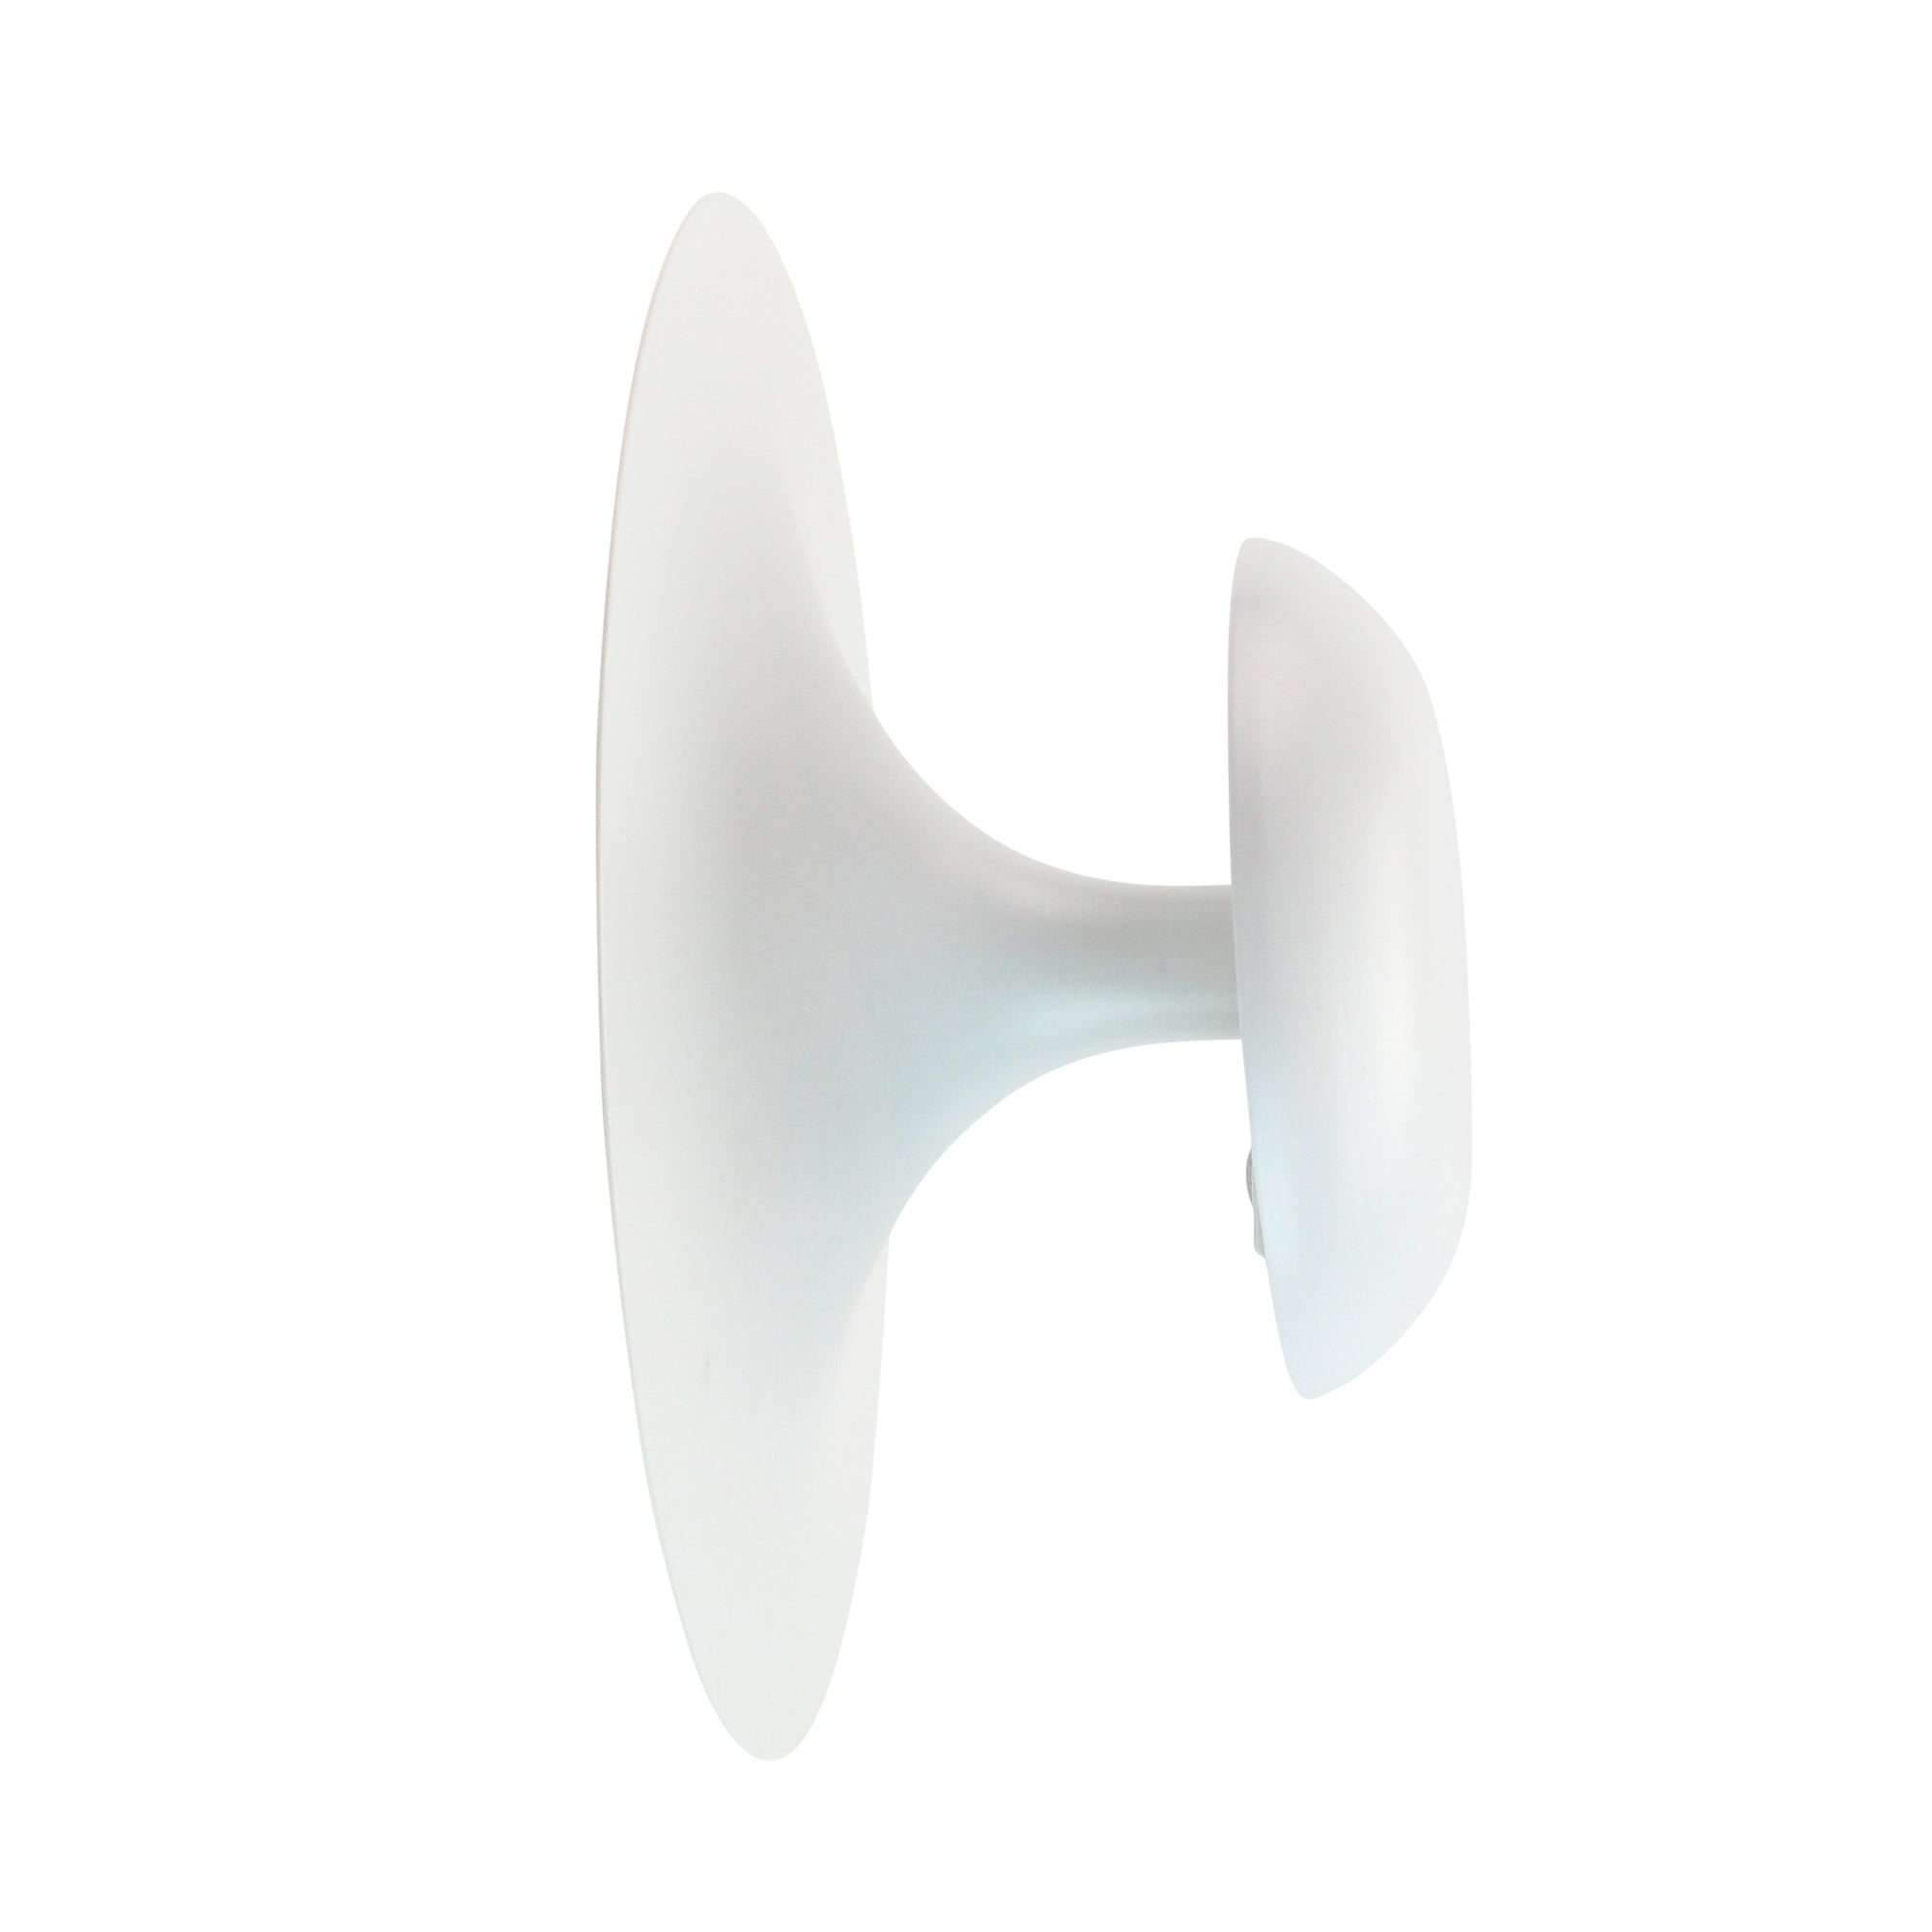 EuroFase Lighting, EUROFASE LIGHTING 14089-015 ELOM1 2 LIGHT SMALL WALL SCONCE, MODERN, WHITE